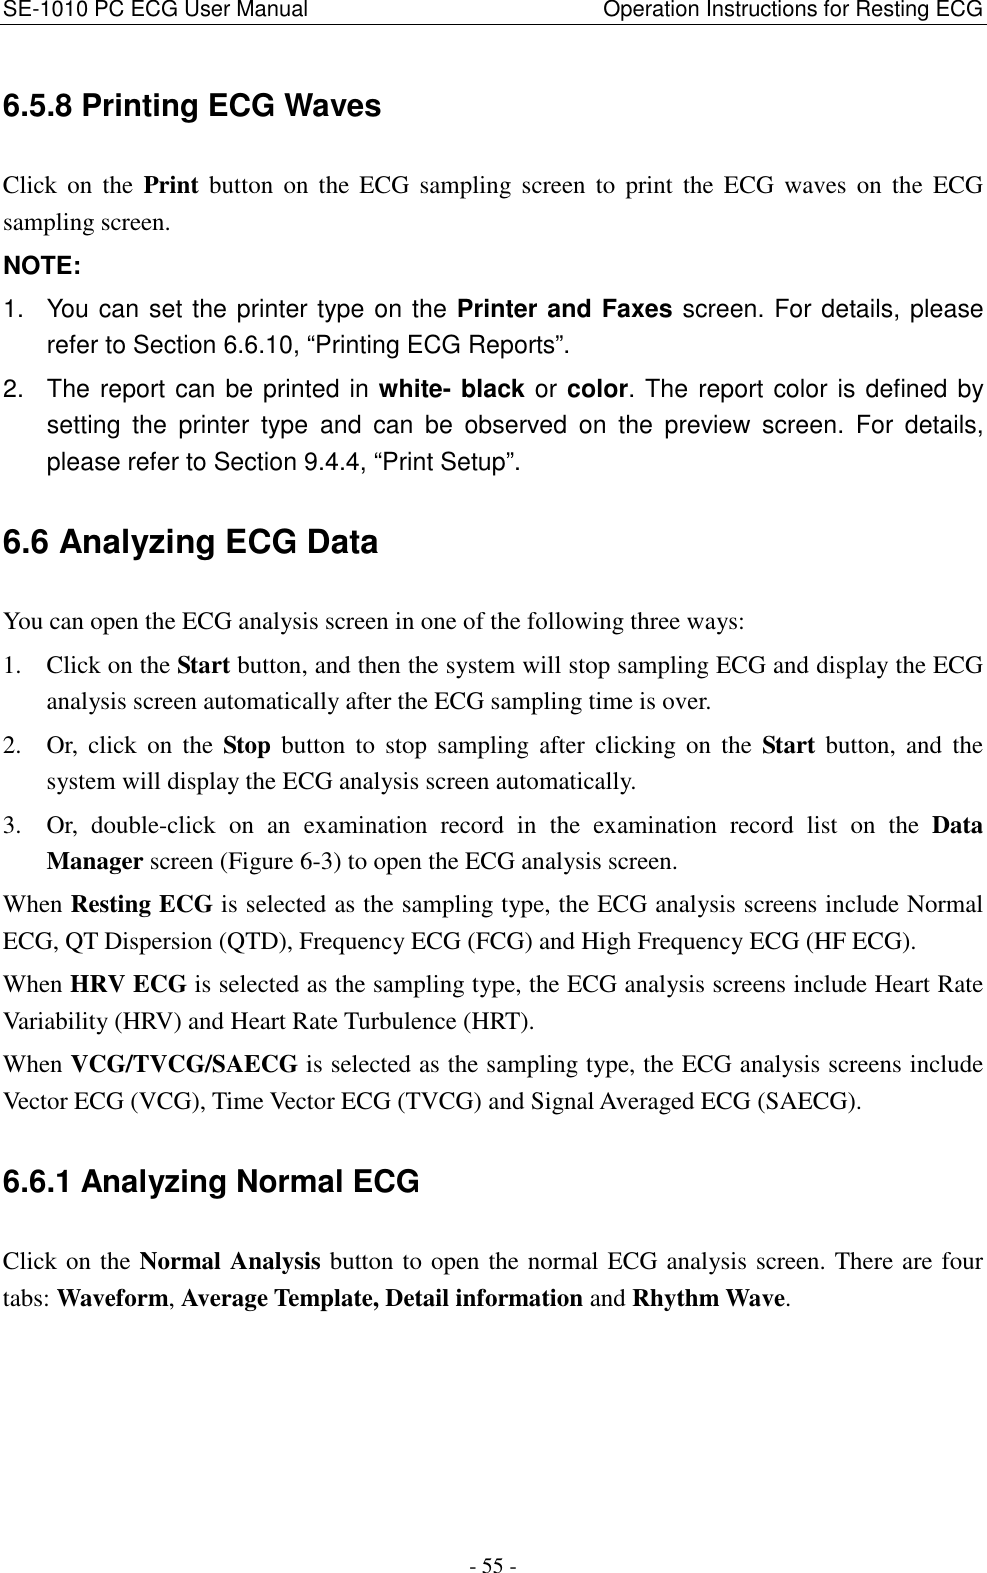 SE-1010 PC ECG User Manual                                                      Operation Instructions for Resting ECG - 55 - 6.5.8 Printing ECG Waves Click  on  the  Print  button  on  the  ECG  sampling  screen  to  print  the  ECG  waves  on  the  ECG sampling screen. NOTE:   1.  You can set the printer type on the Printer and Faxes screen. For details, please refer to Section 6.6.10, “Printing ECG Reports”.   2.  The report can be printed in white- black or color. The report color is defined by setting  the  printer  type  and  can  be  observed  on  the  preview  screen.  For  details, please refer to Section 9.4.4, “Print Setup”. 6.6 Analyzing ECG Data You can open the ECG analysis screen in one of the following three ways: 1. Click on the Start button, and then the system will stop sampling ECG and display the ECG analysis screen automatically after the ECG sampling time is over. 2. Or,  click  on  the  Stop  button  to  stop  sampling  after clicking  on  the  Start  button,  and  the system will display the ECG analysis screen automatically. 3. Or,  double-click  on  an  examination  record  in  the  examination  record  list  on  the  Data Manager screen (Figure 6-3) to open the ECG analysis screen. When Resting ECG is selected as the sampling type, the ECG analysis screens include Normal ECG, QT Dispersion (QTD), Frequency ECG (FCG) and High Frequency ECG (HF ECG). When HRV ECG is selected as the sampling type, the ECG analysis screens include Heart Rate Variability (HRV) and Heart Rate Turbulence (HRT). When VCG/TVCG/SAECG is selected as the sampling type, the ECG analysis screens include Vector ECG (VCG), Time Vector ECG (TVCG) and Signal Averaged ECG (SAECG). 6.6.1 Analyzing Normal ECG Click on the Normal Analysis button to open the normal ECG analysis screen. There are four tabs: Waveform, Average Template, Detail information and Rhythm Wave. 